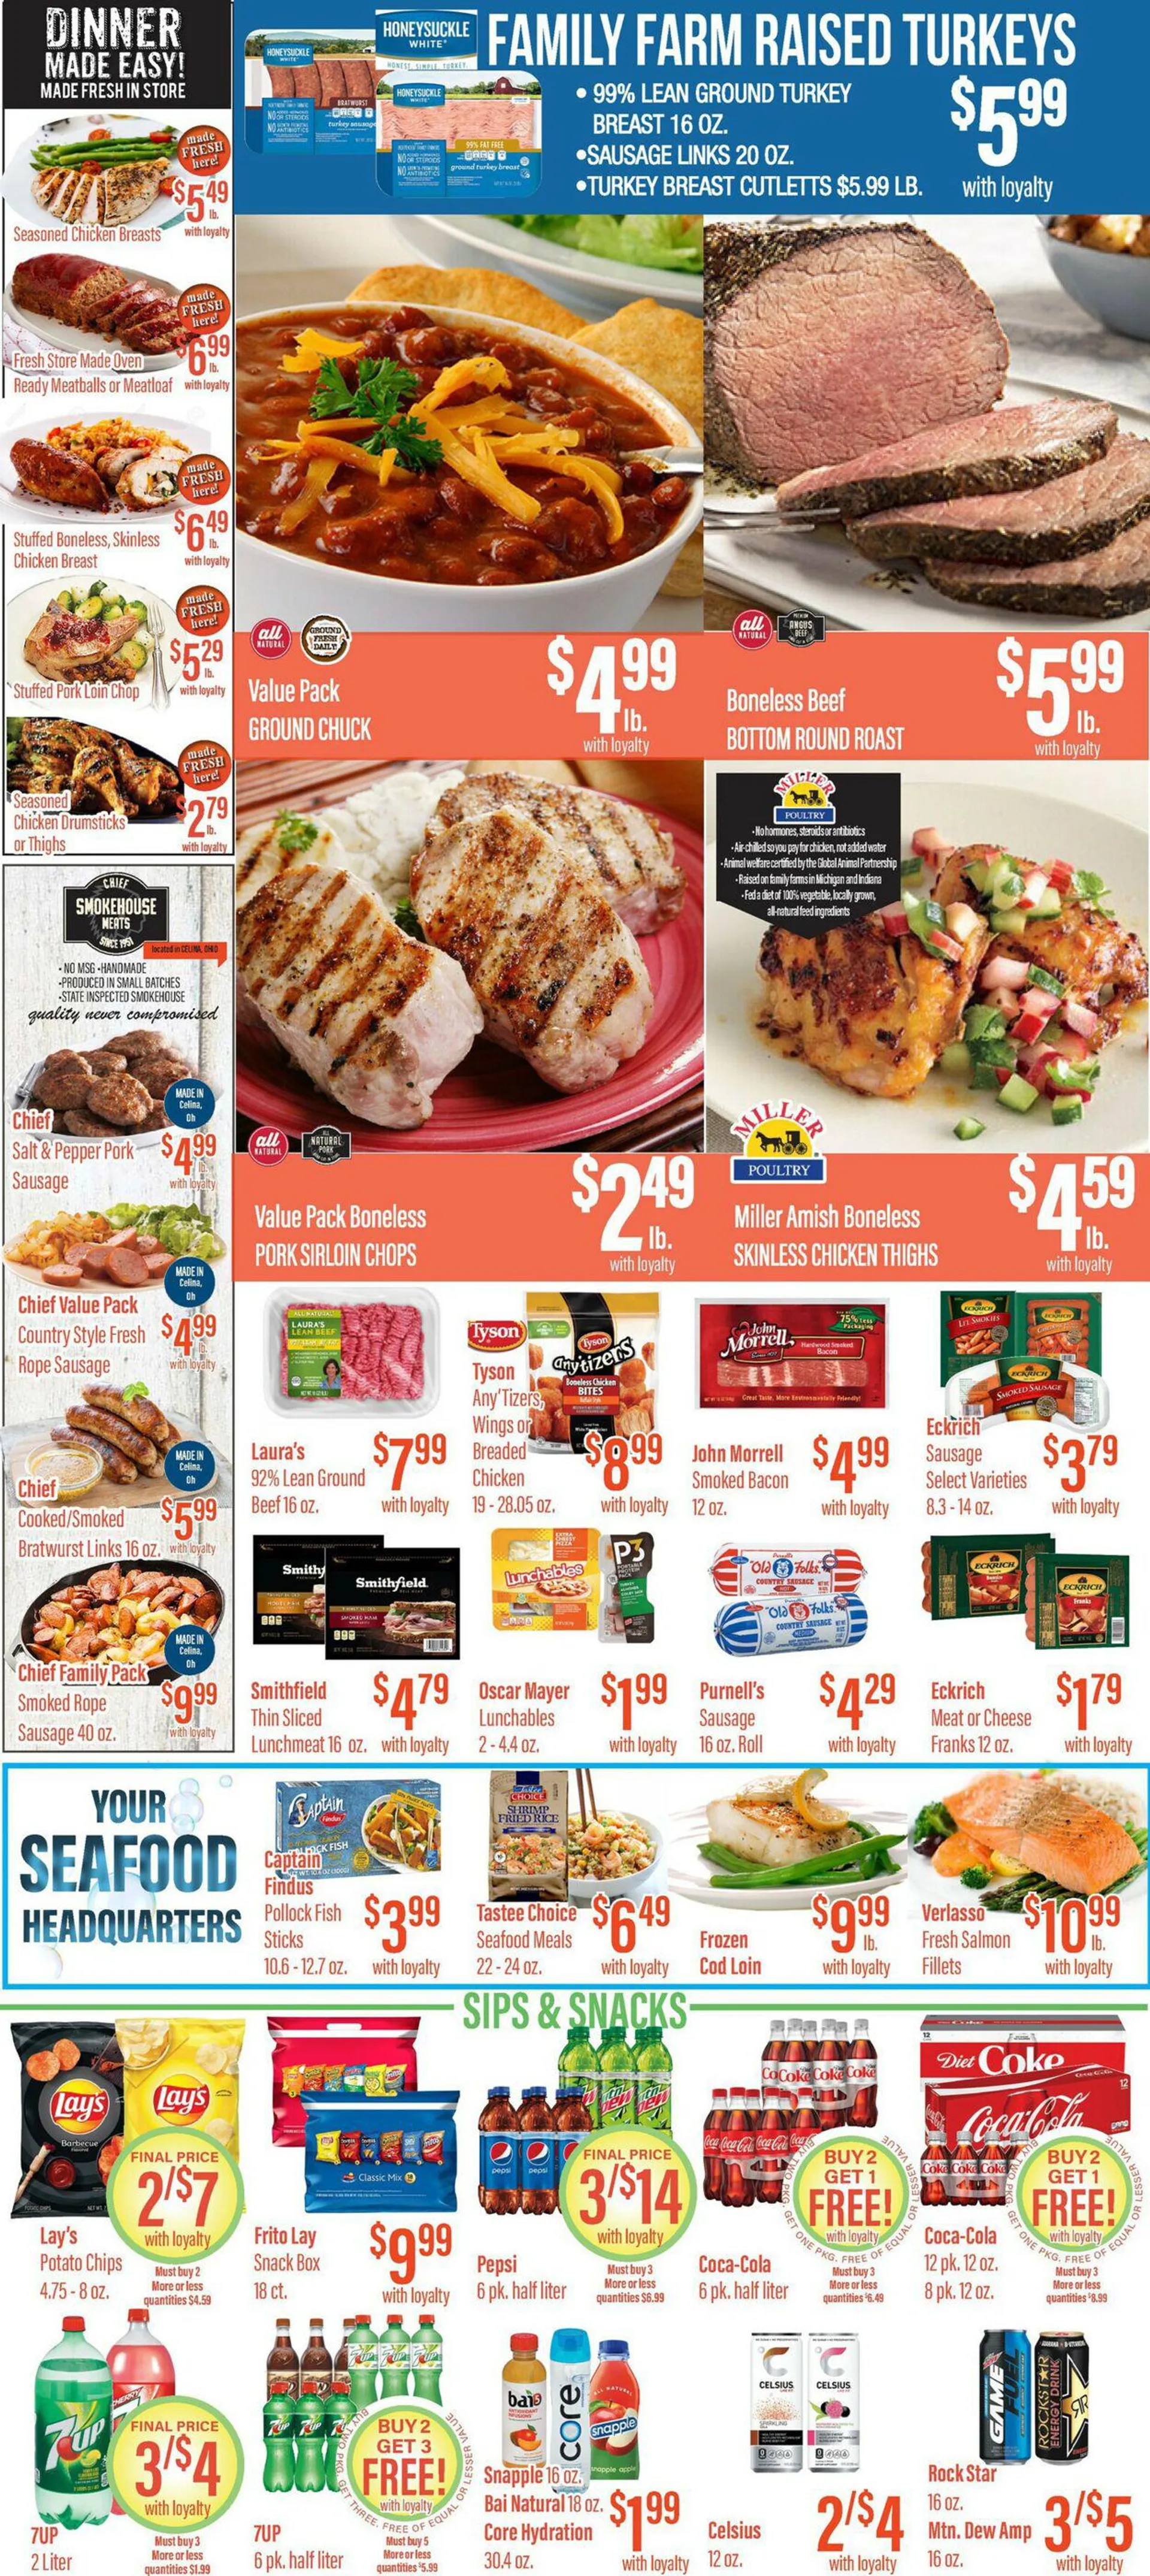 Remke Markets Current weekly ad - 3